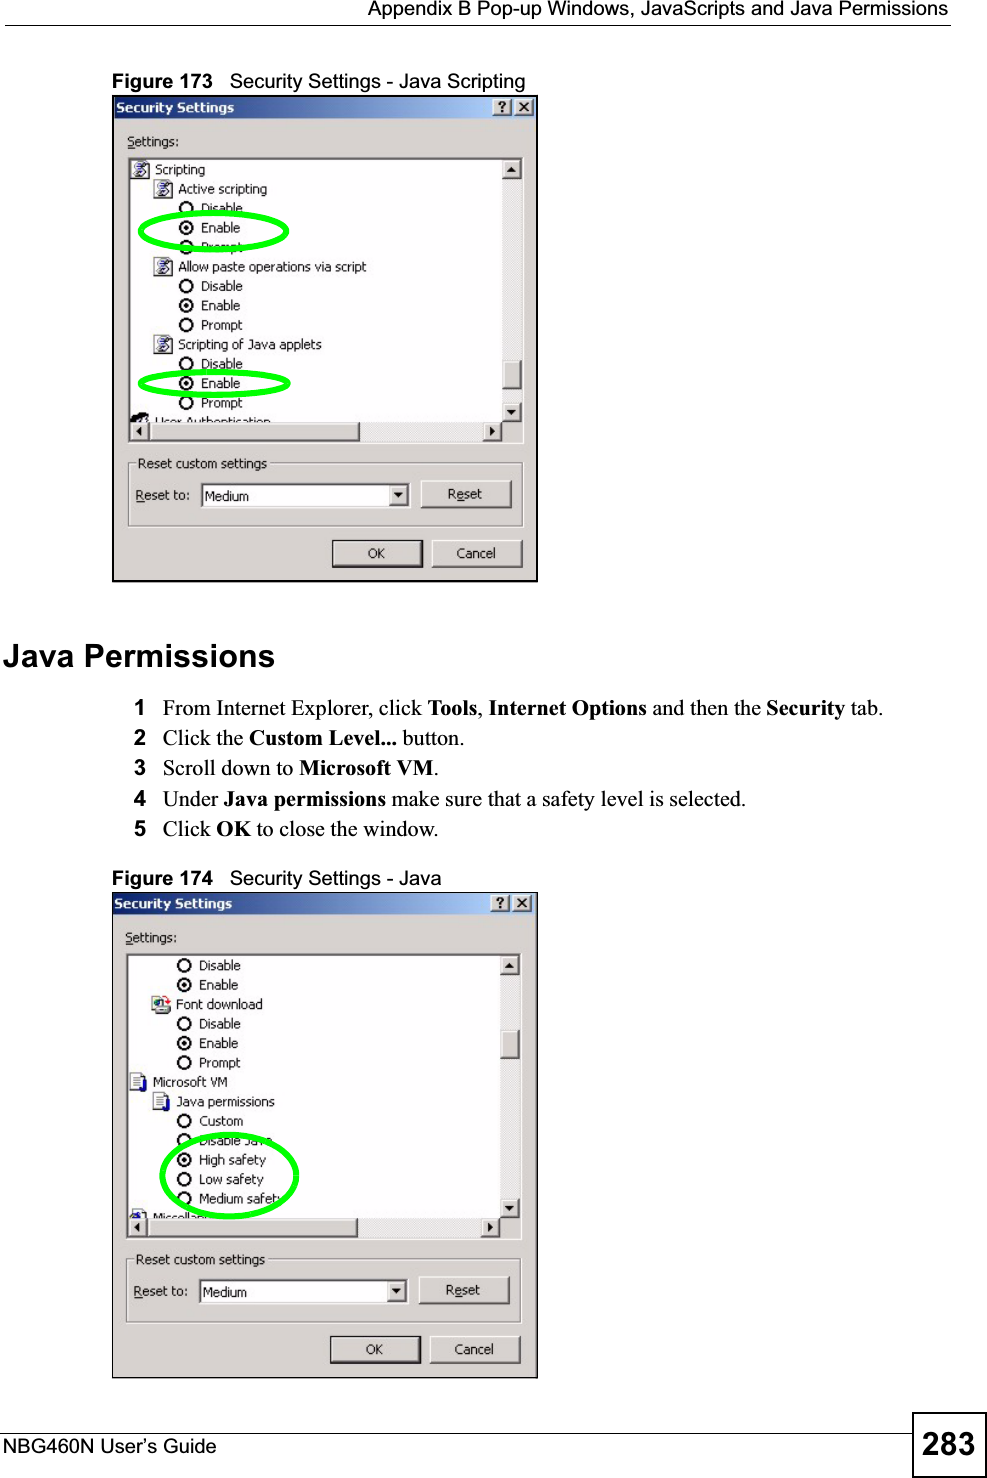  Appendix B Pop-up Windows, JavaScripts and Java PermissionsNBG460N User’s Guide 283Figure 173   Security Settings - Java ScriptingJava Permissions1From Internet Explorer, click Tools,Internet Options and then the Security tab. 2Click the Custom Level... button. 3Scroll down to Microsoft VM.4Under Java permissions make sure that a safety level is selected.5Click OK to close the window.Figure 174   Security Settings - Java 